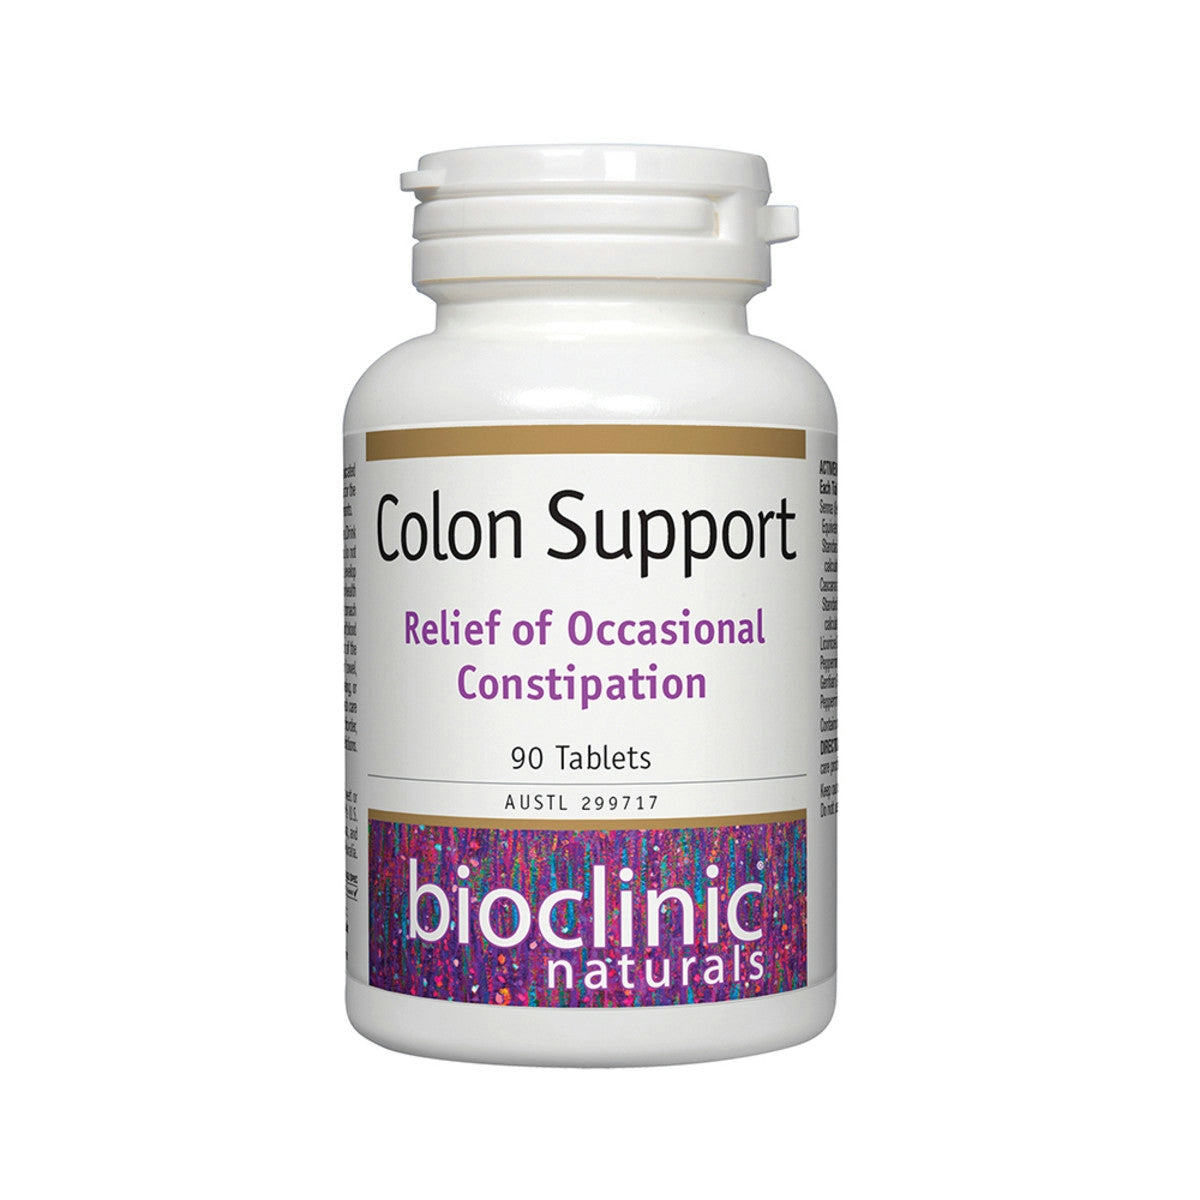 Image of Bioclinic Naturals Colon Support  90t with a white background